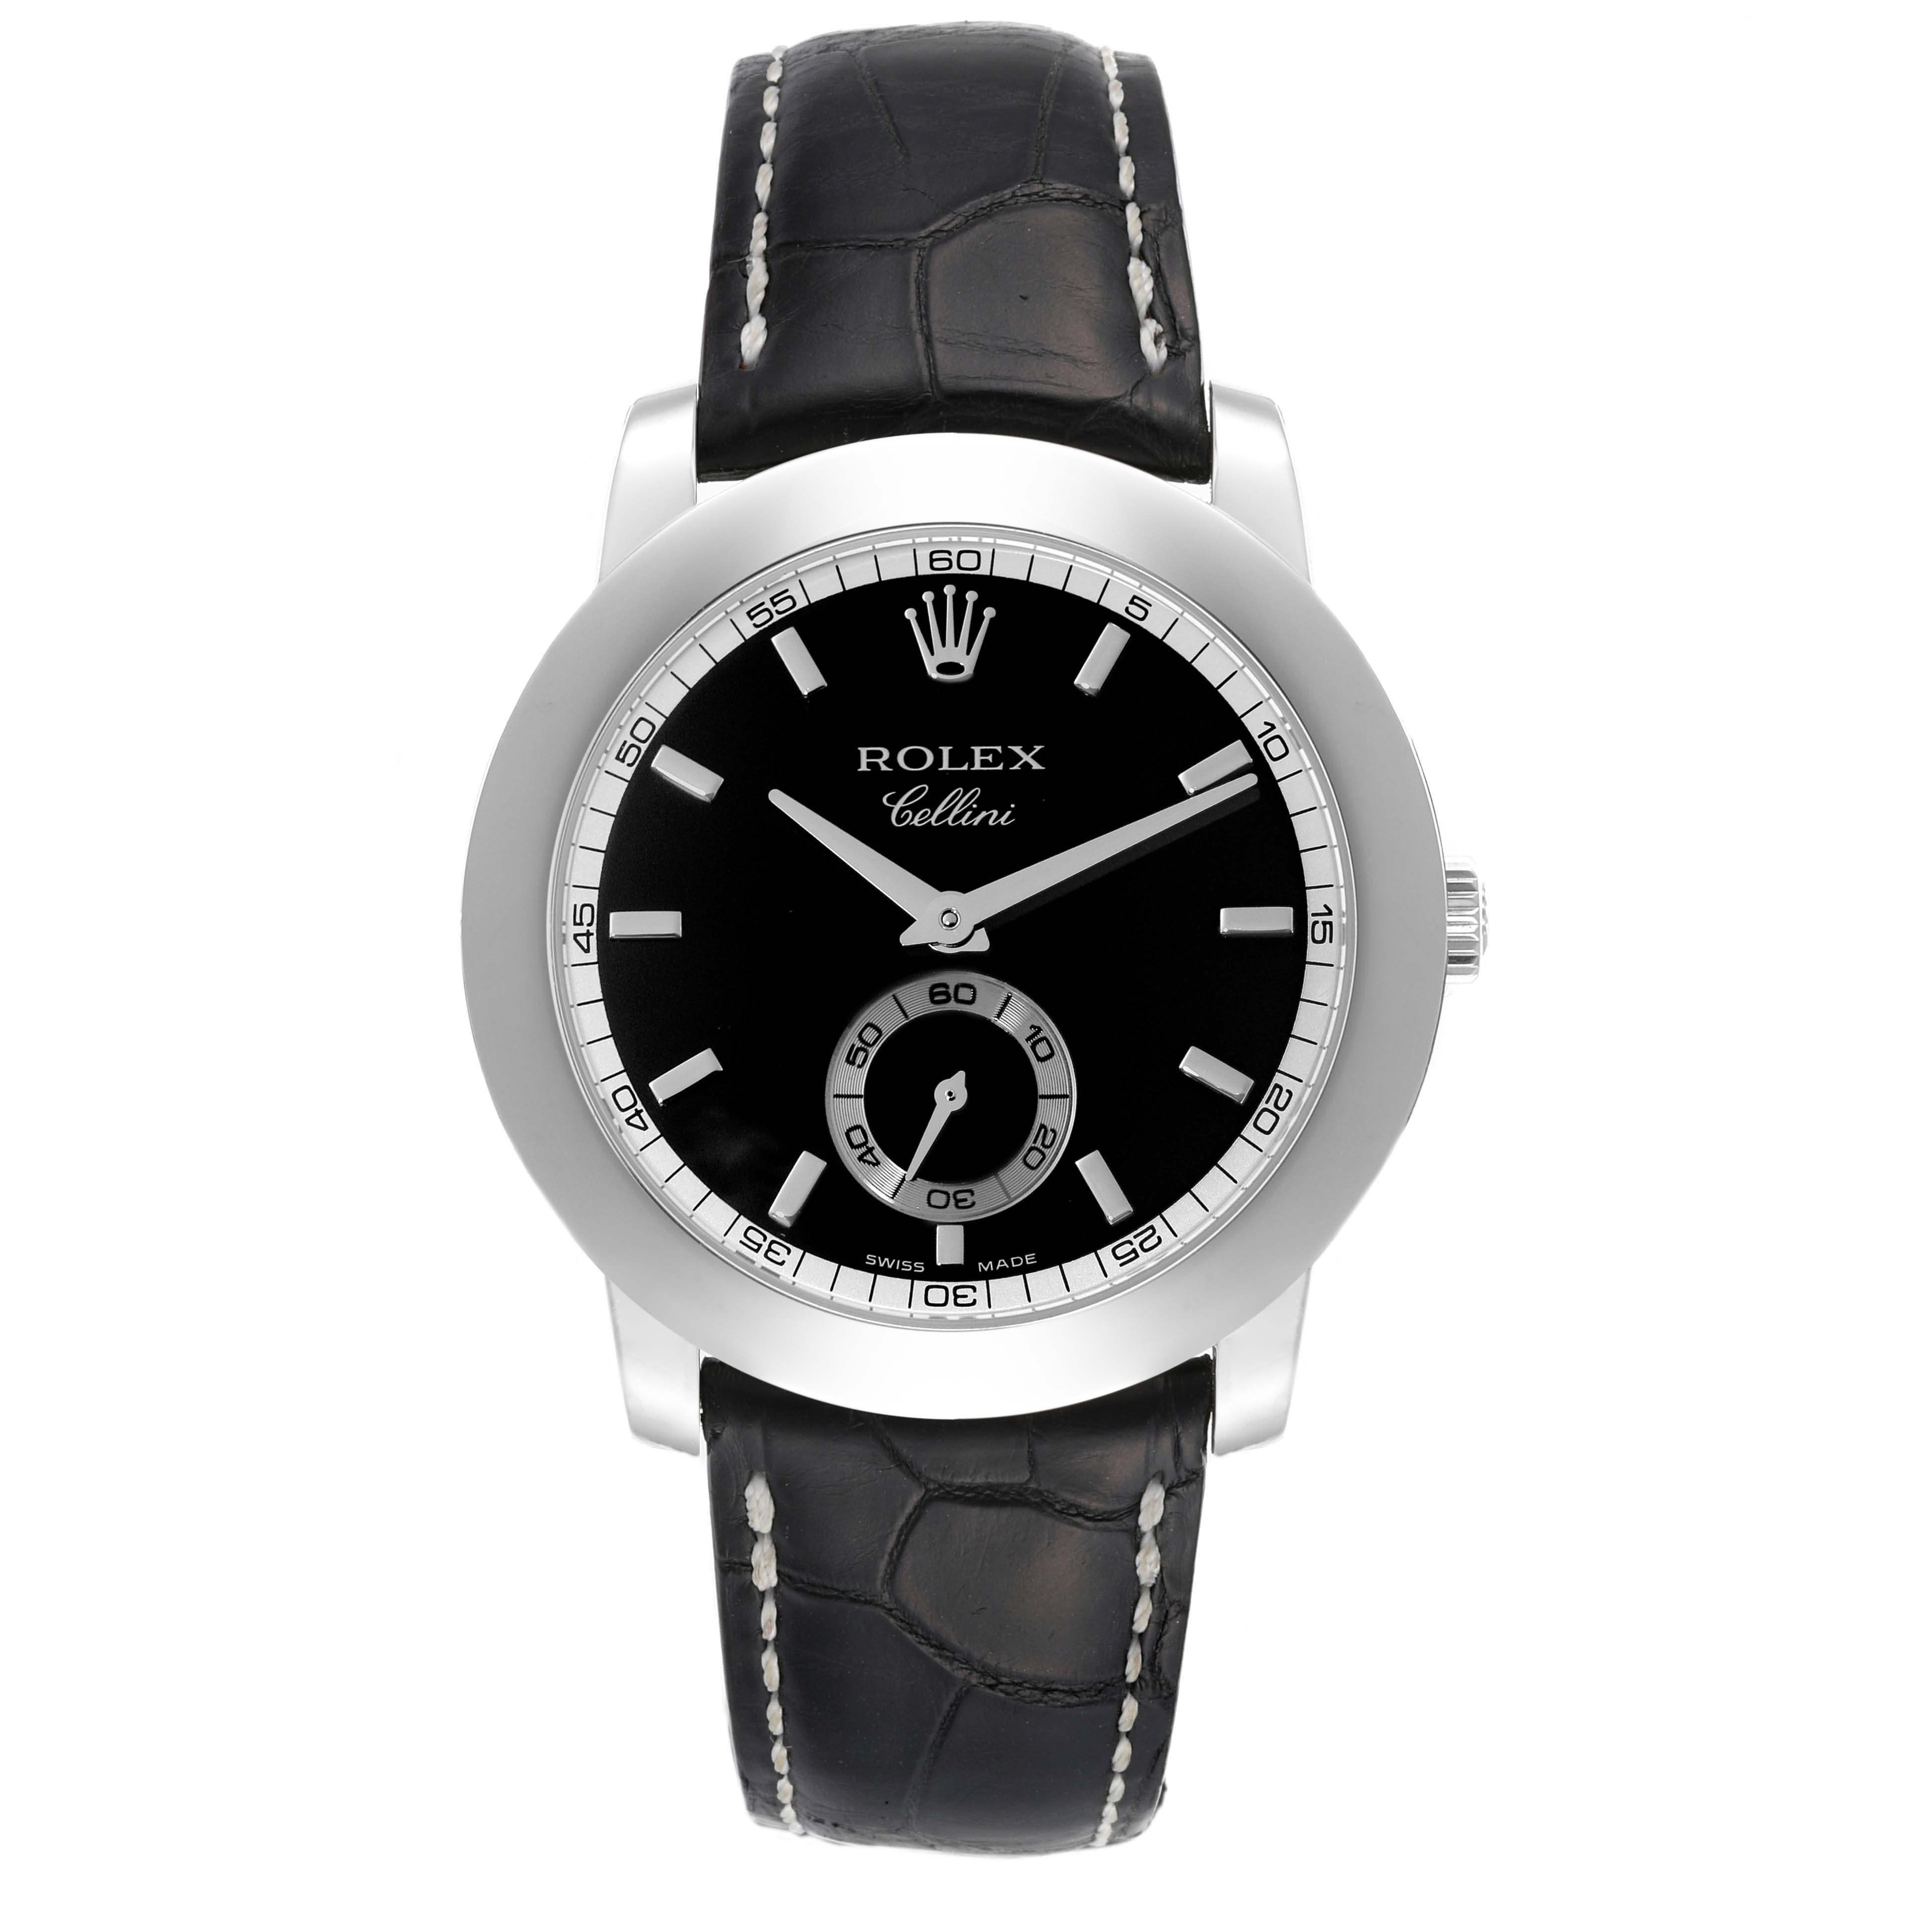 Rolex Cellini Cellinium 35mm Platinum Black Dial Mens Watch 5241 Card. Manual winding movement. Platinum case 35 mm in diameter. Rolex logo on a crown. . Scratch resistant sapphire crystal. Black dial with raised baton hour markers. Small seconds